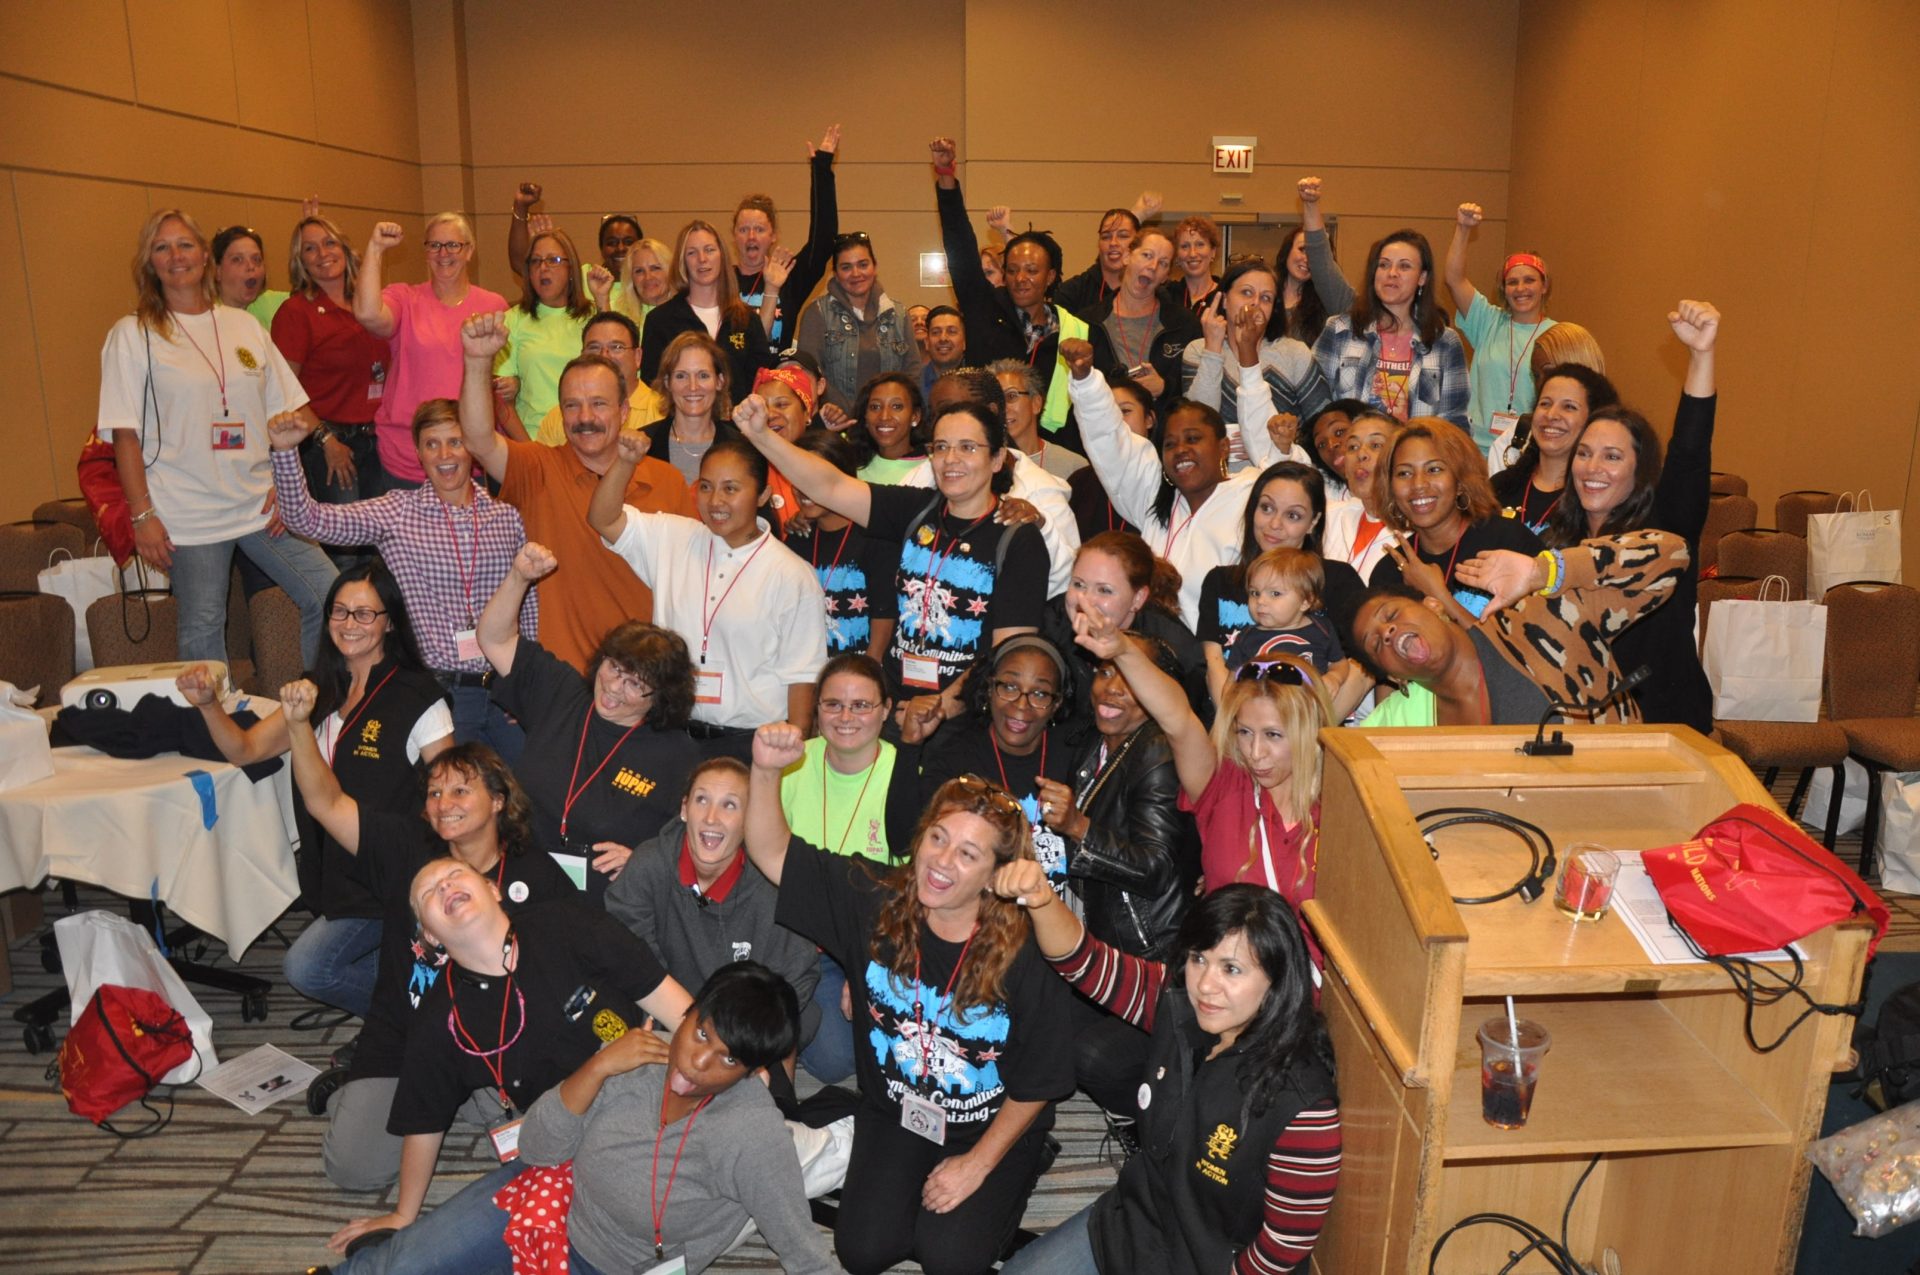 Image from the Gallery: Women Build Nations Conference – Chicago, IL